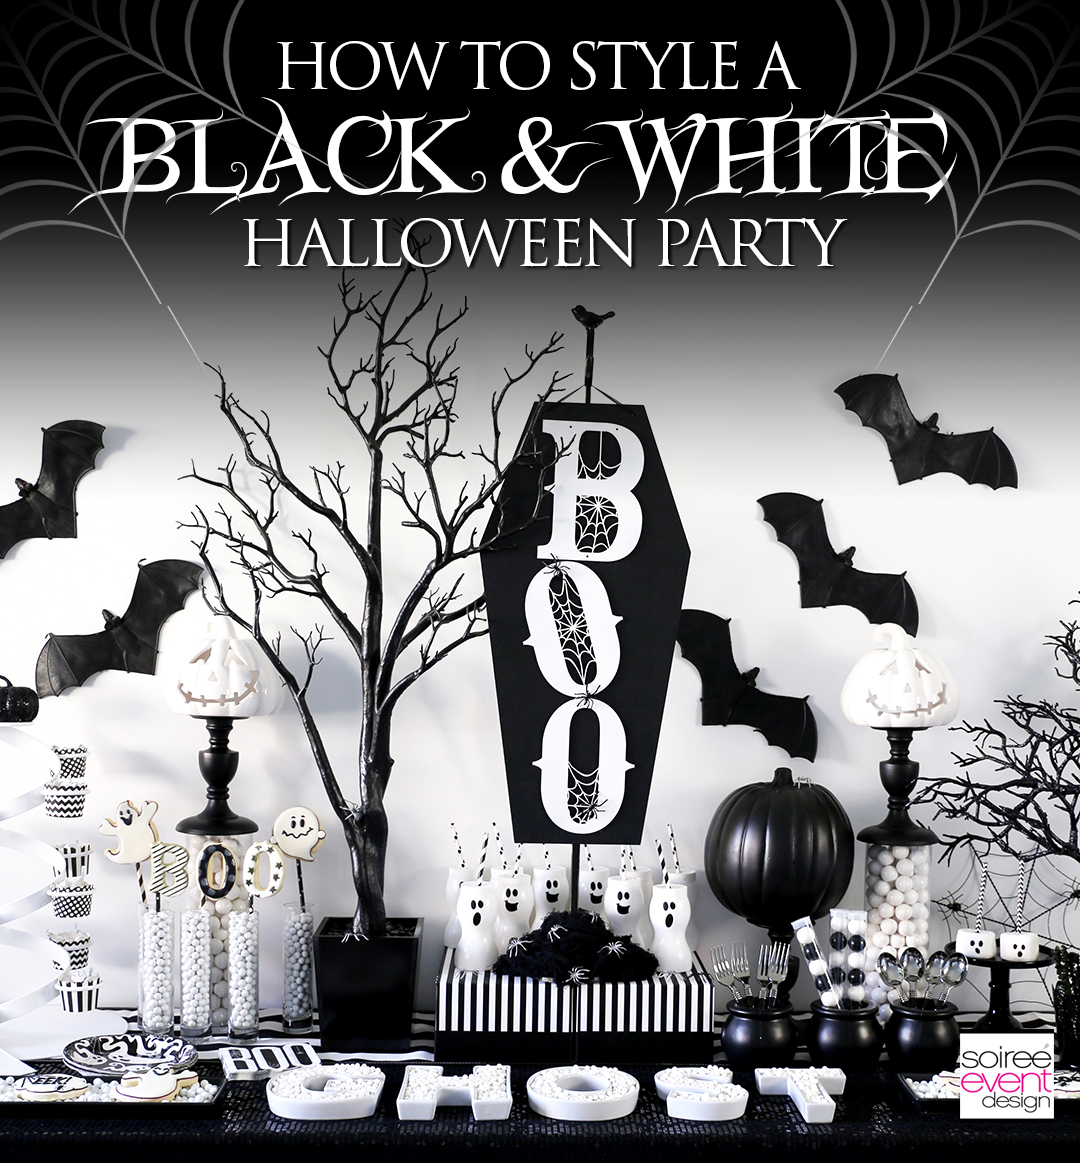 BOO Black and White Halloween Party - Soiree Event Design